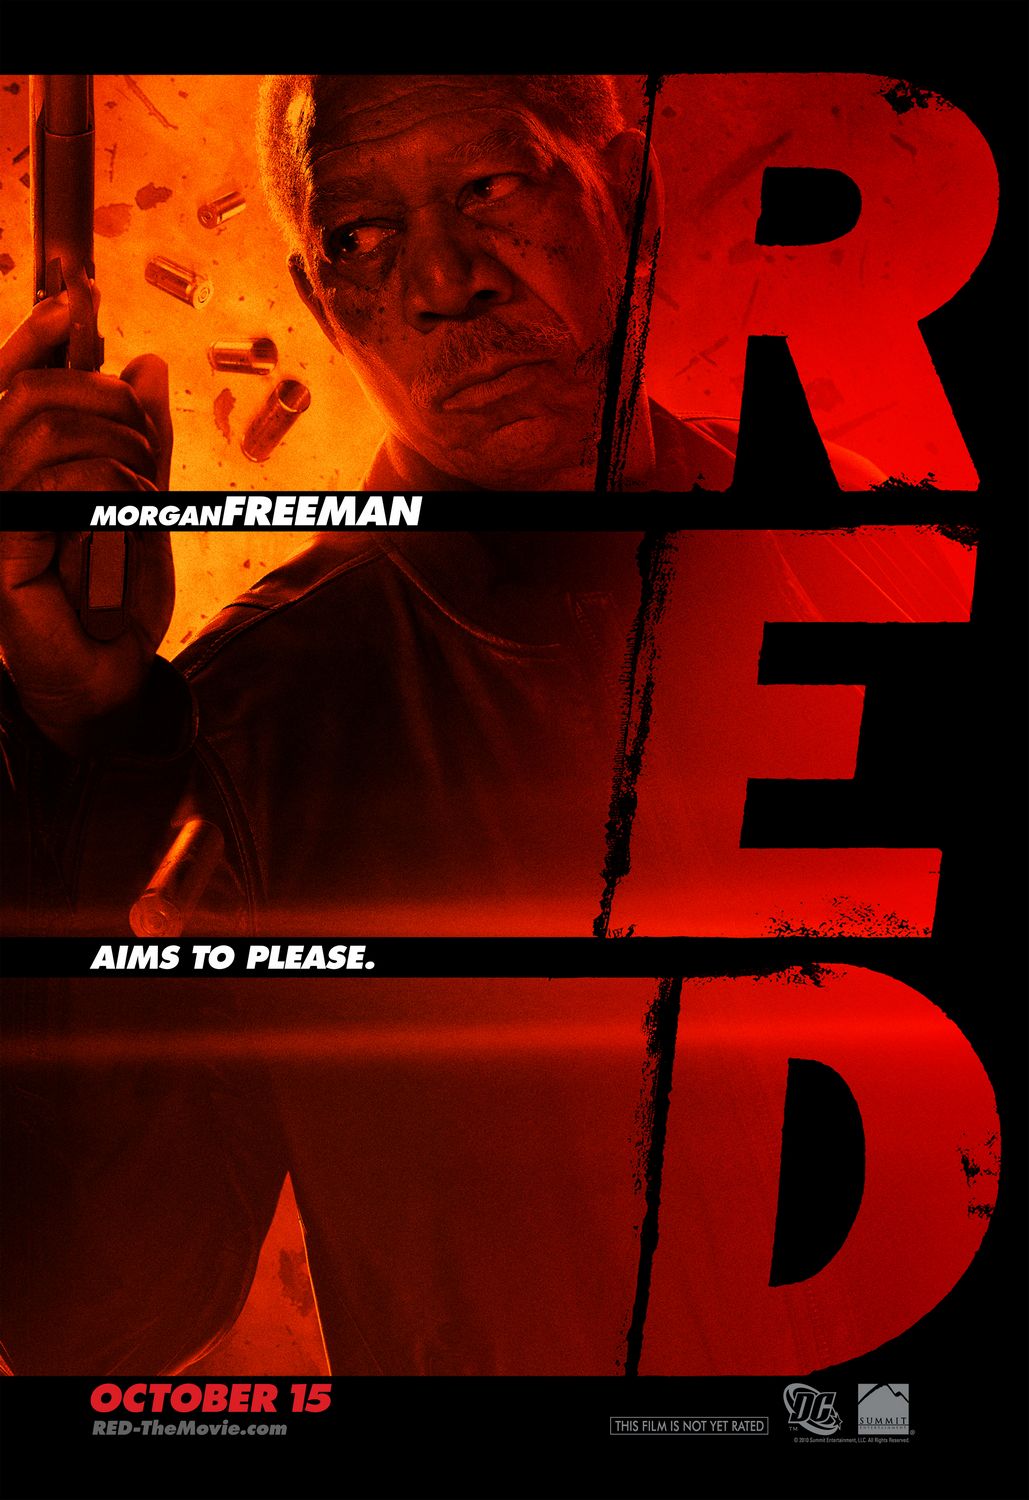 Red (2010) trailer 